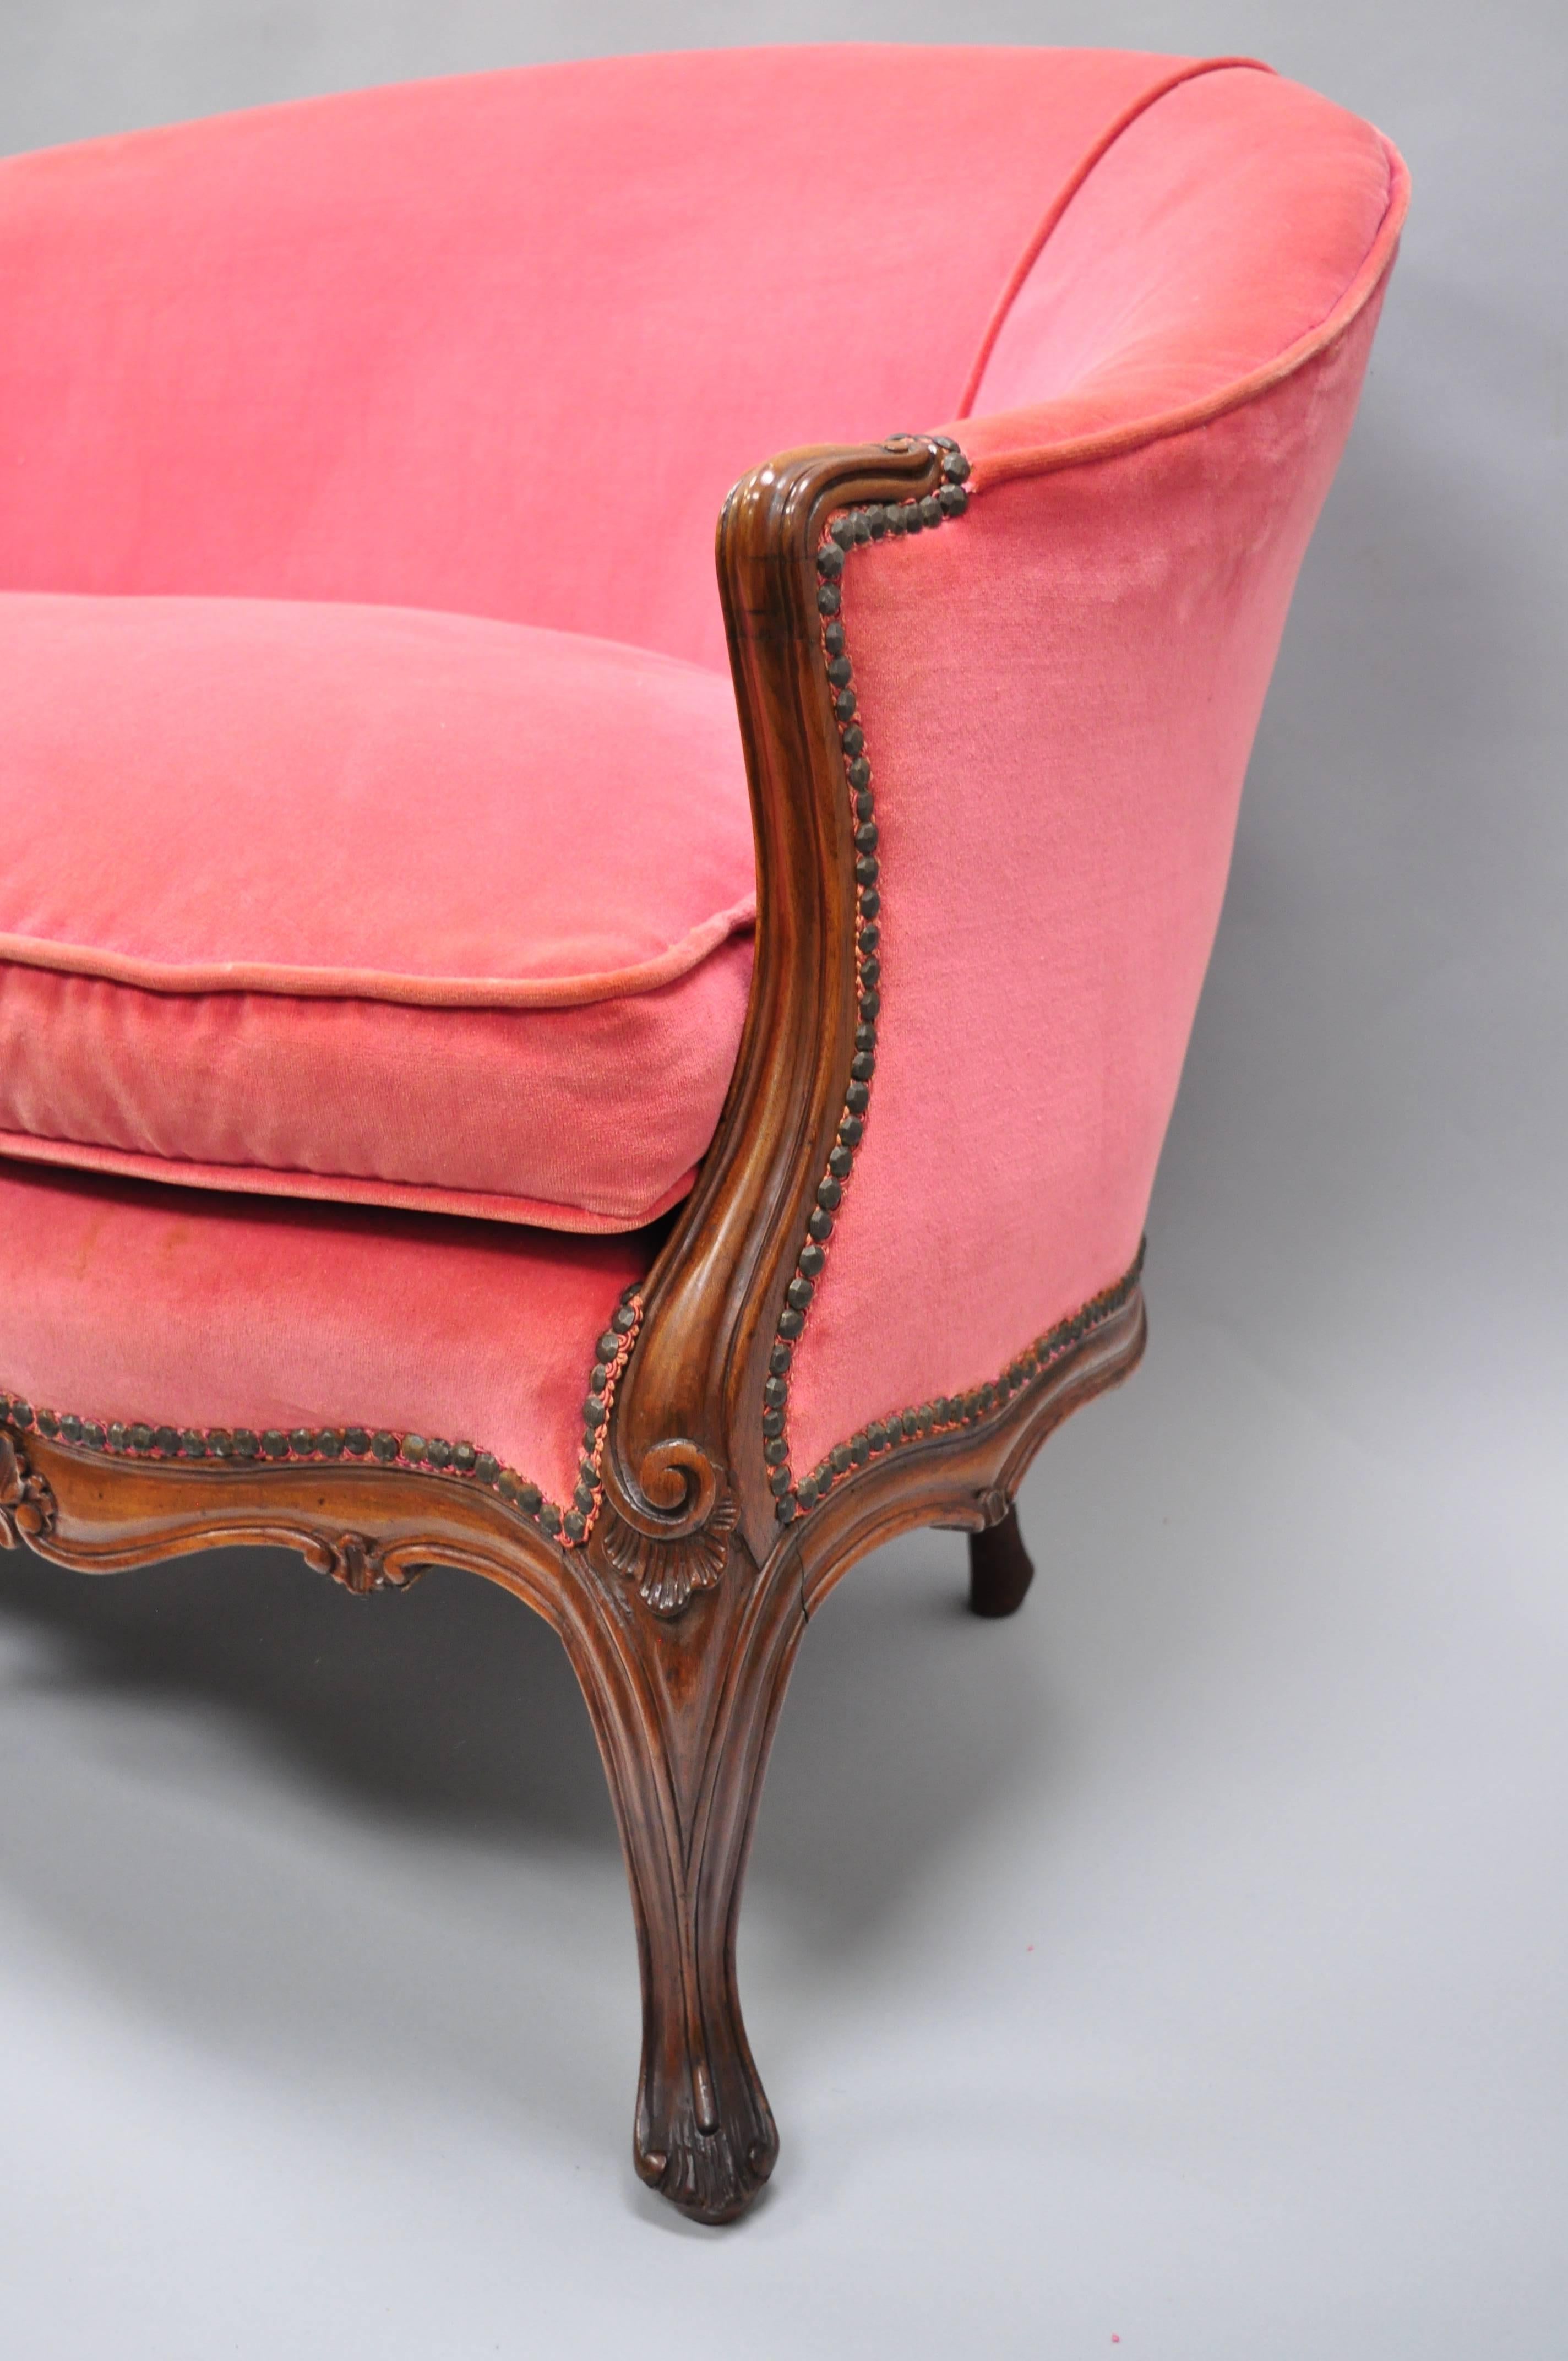 20th Century Antique French Louis XV Style Carved Walnut Settee Loveseat Canapé Pink Sofa